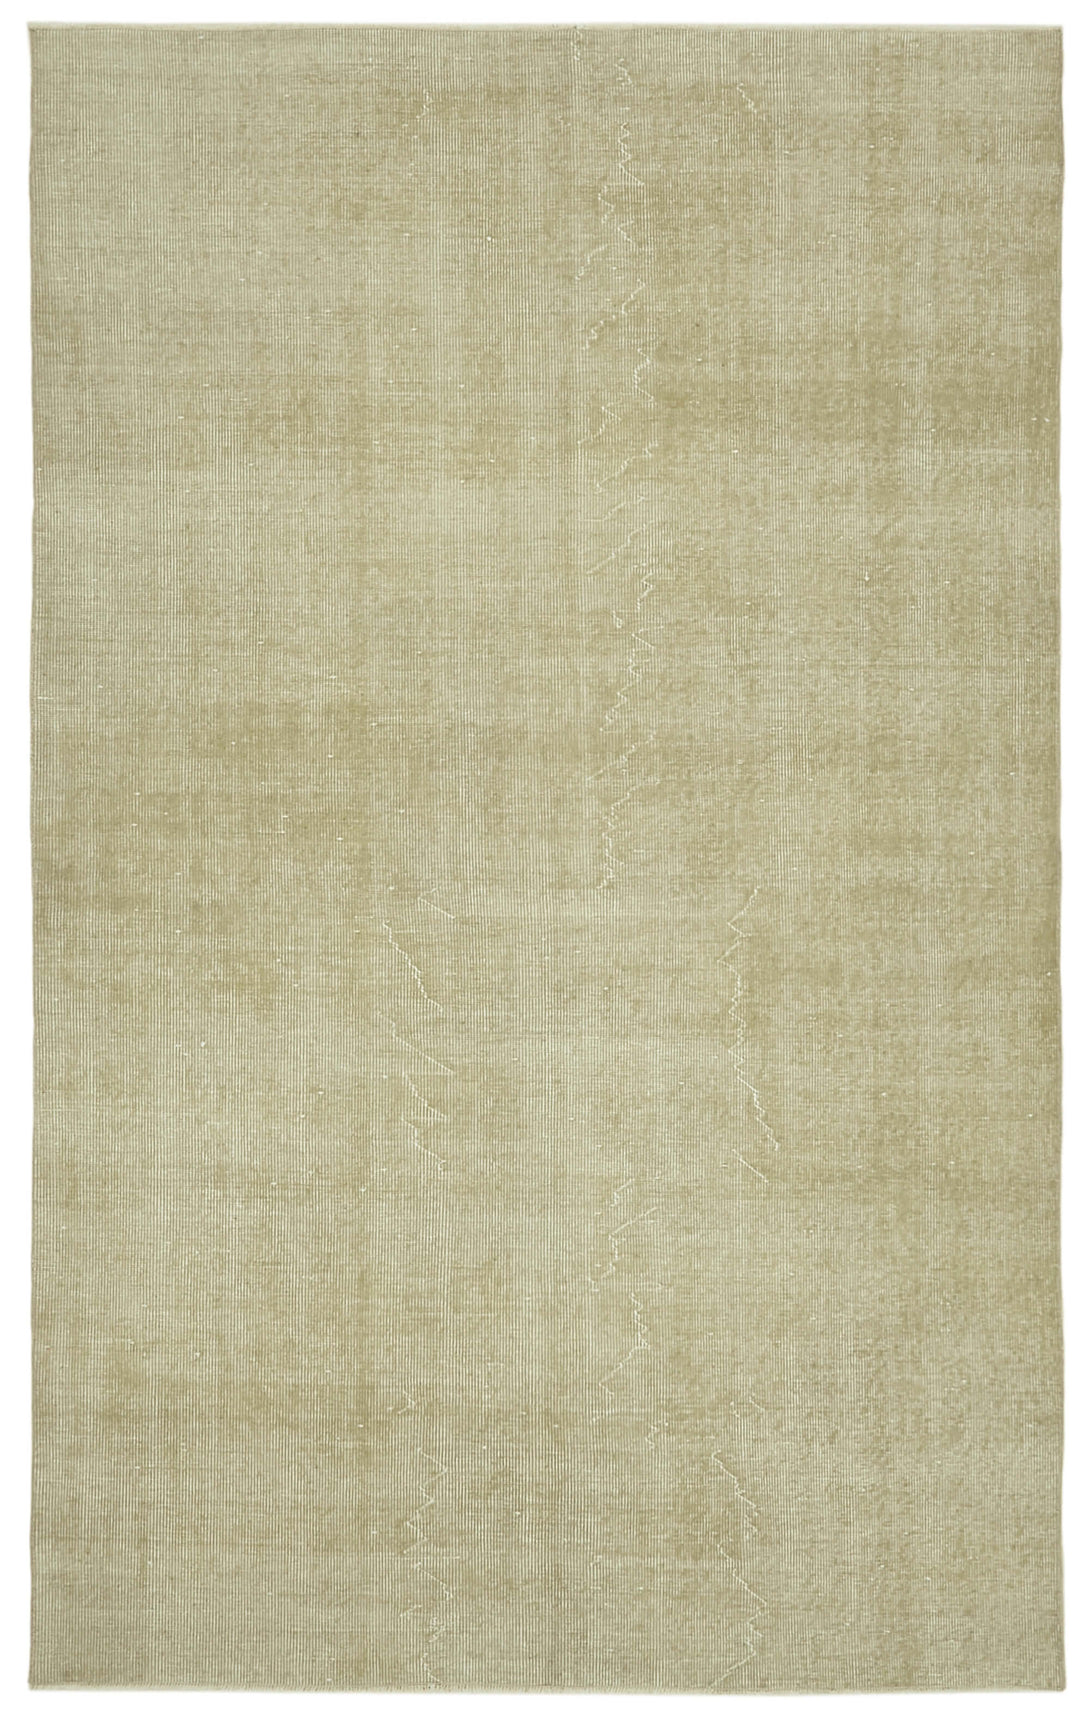 Handmade White Wash Area Rug > Design# OL-AC-41439 > Size: 5'-6" x 8'-9", Carpet Culture Rugs, Handmade Rugs, NYC Rugs, New Rugs, Shop Rugs, Rug Store, Outlet Rugs, SoHo Rugs, Rugs in USA